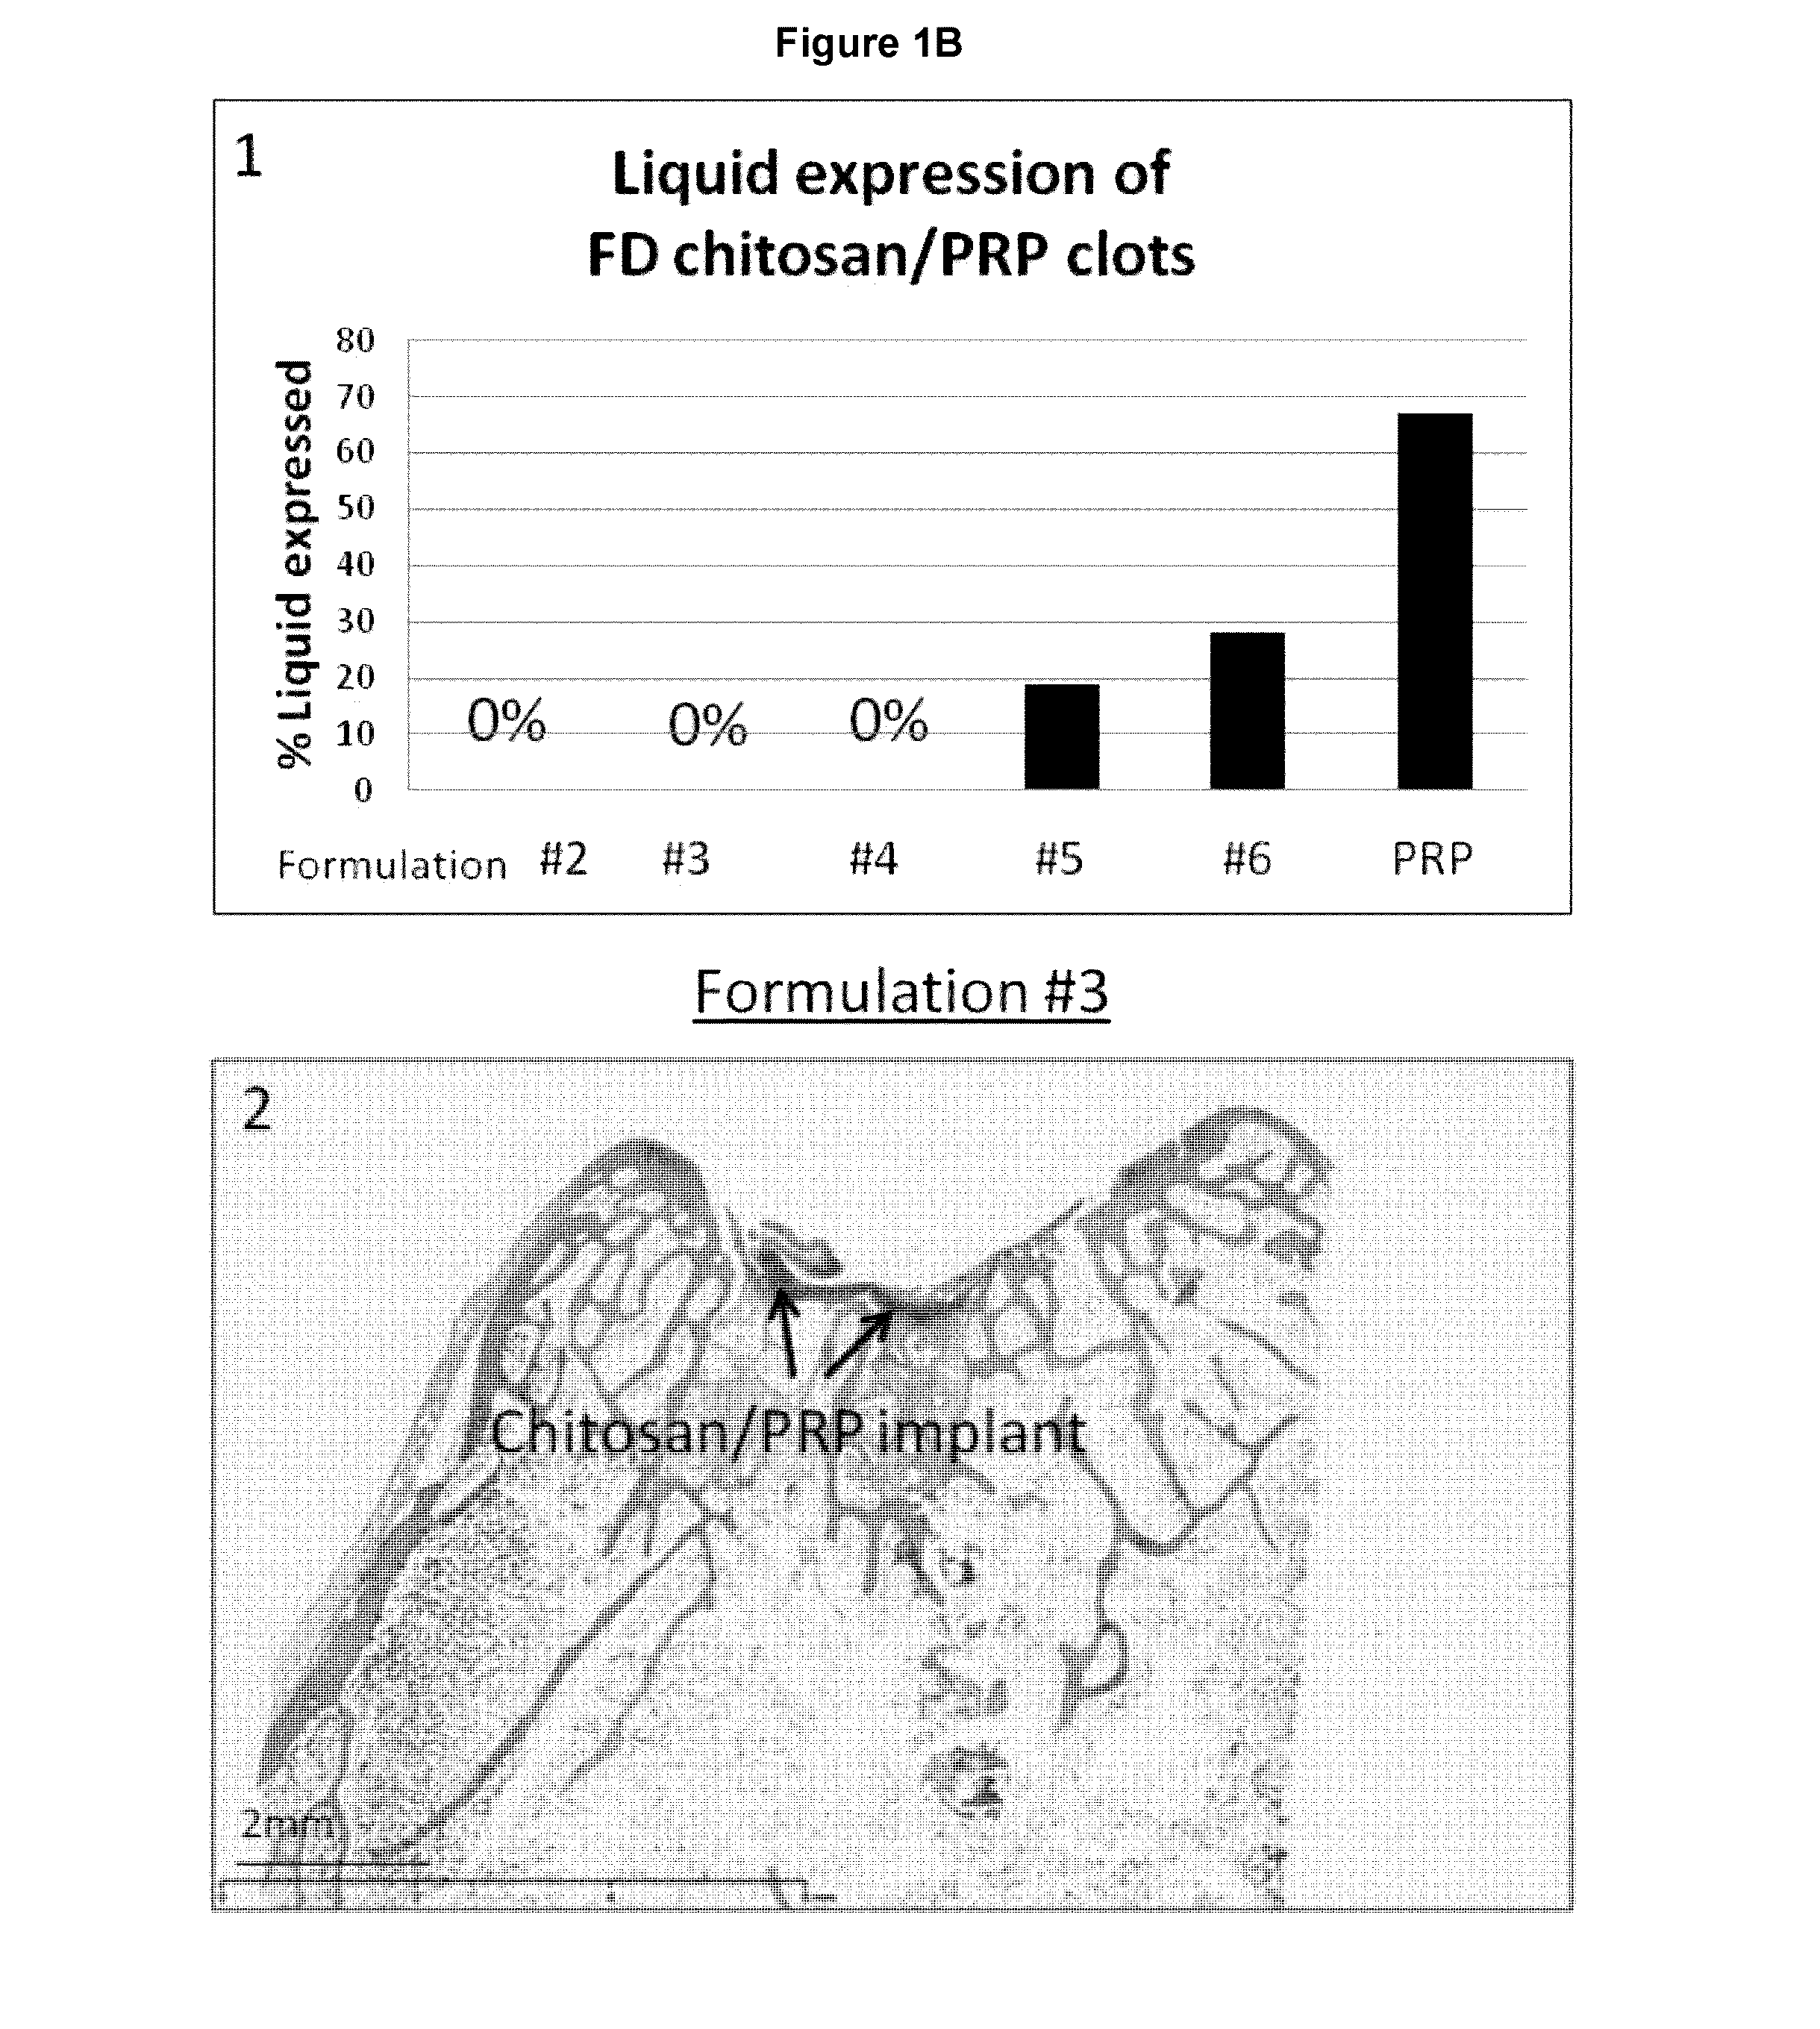 Freeze-dried polymer compositions for mixing with platelet rich plasma to form implants for tissue repair and/or compositions for therapeutic intra-articular injections